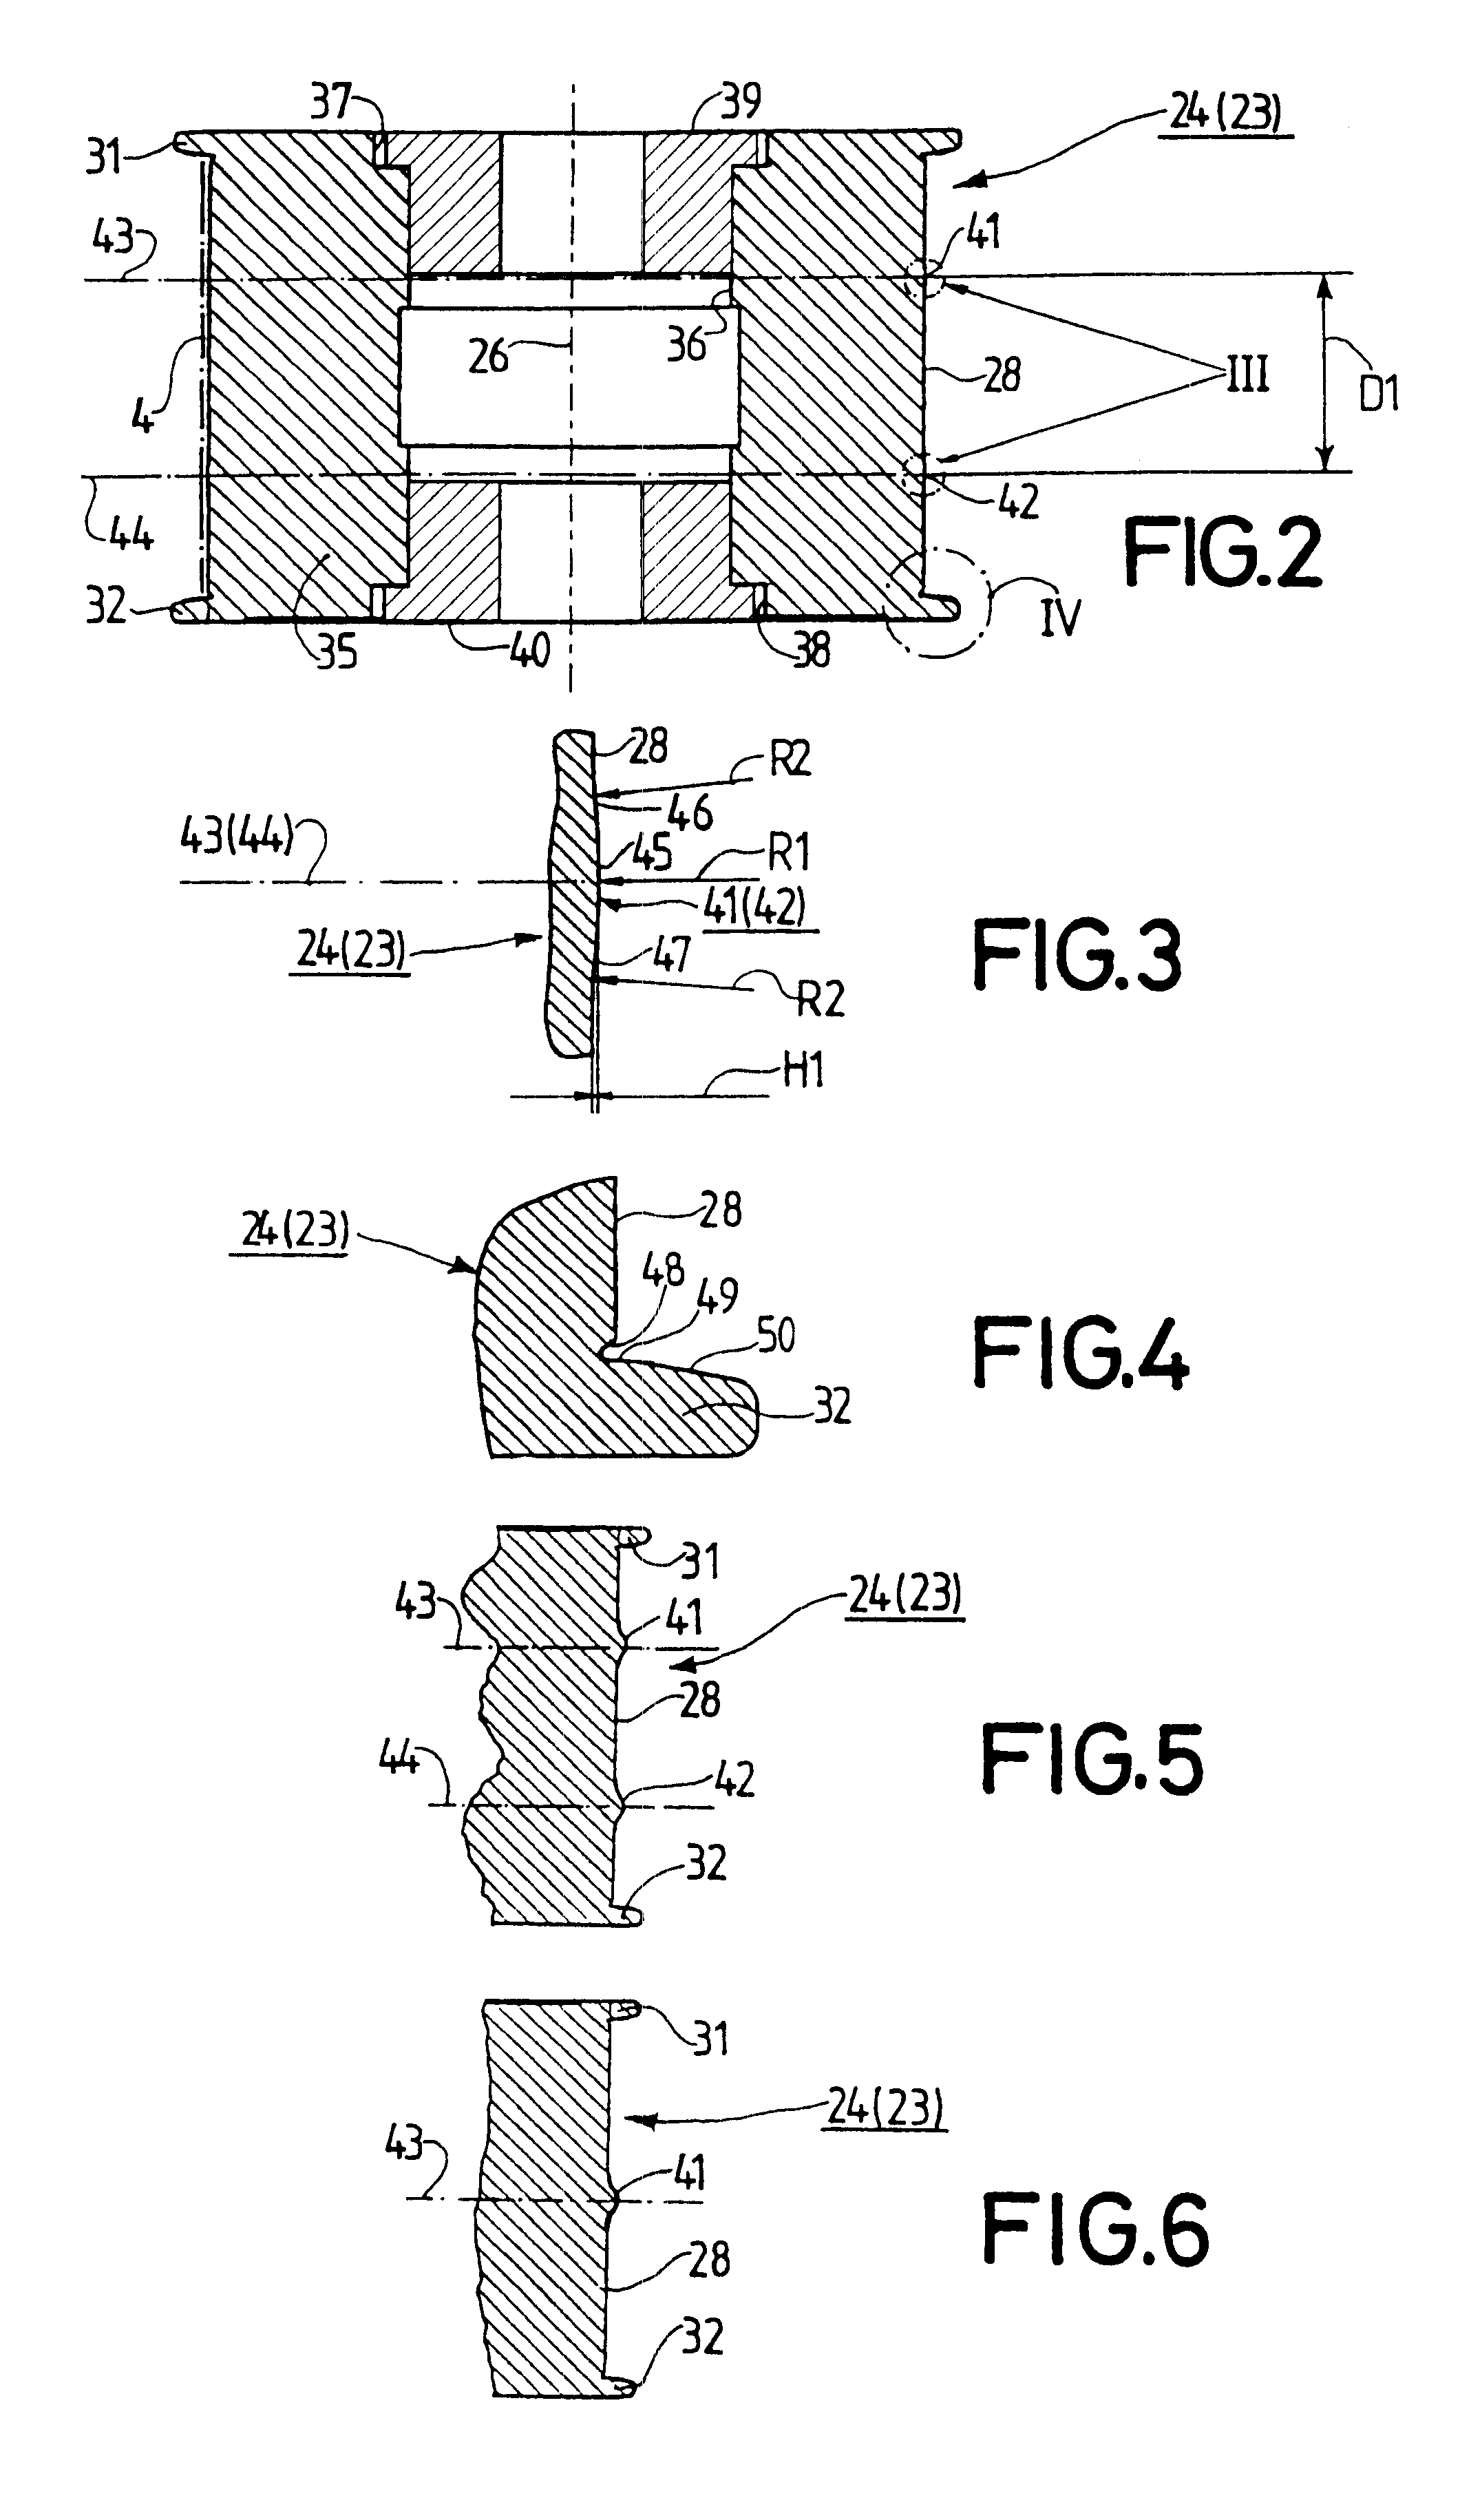 Recording and/or reproducing apparatus including at least one guide arrangement having at least one damping projection